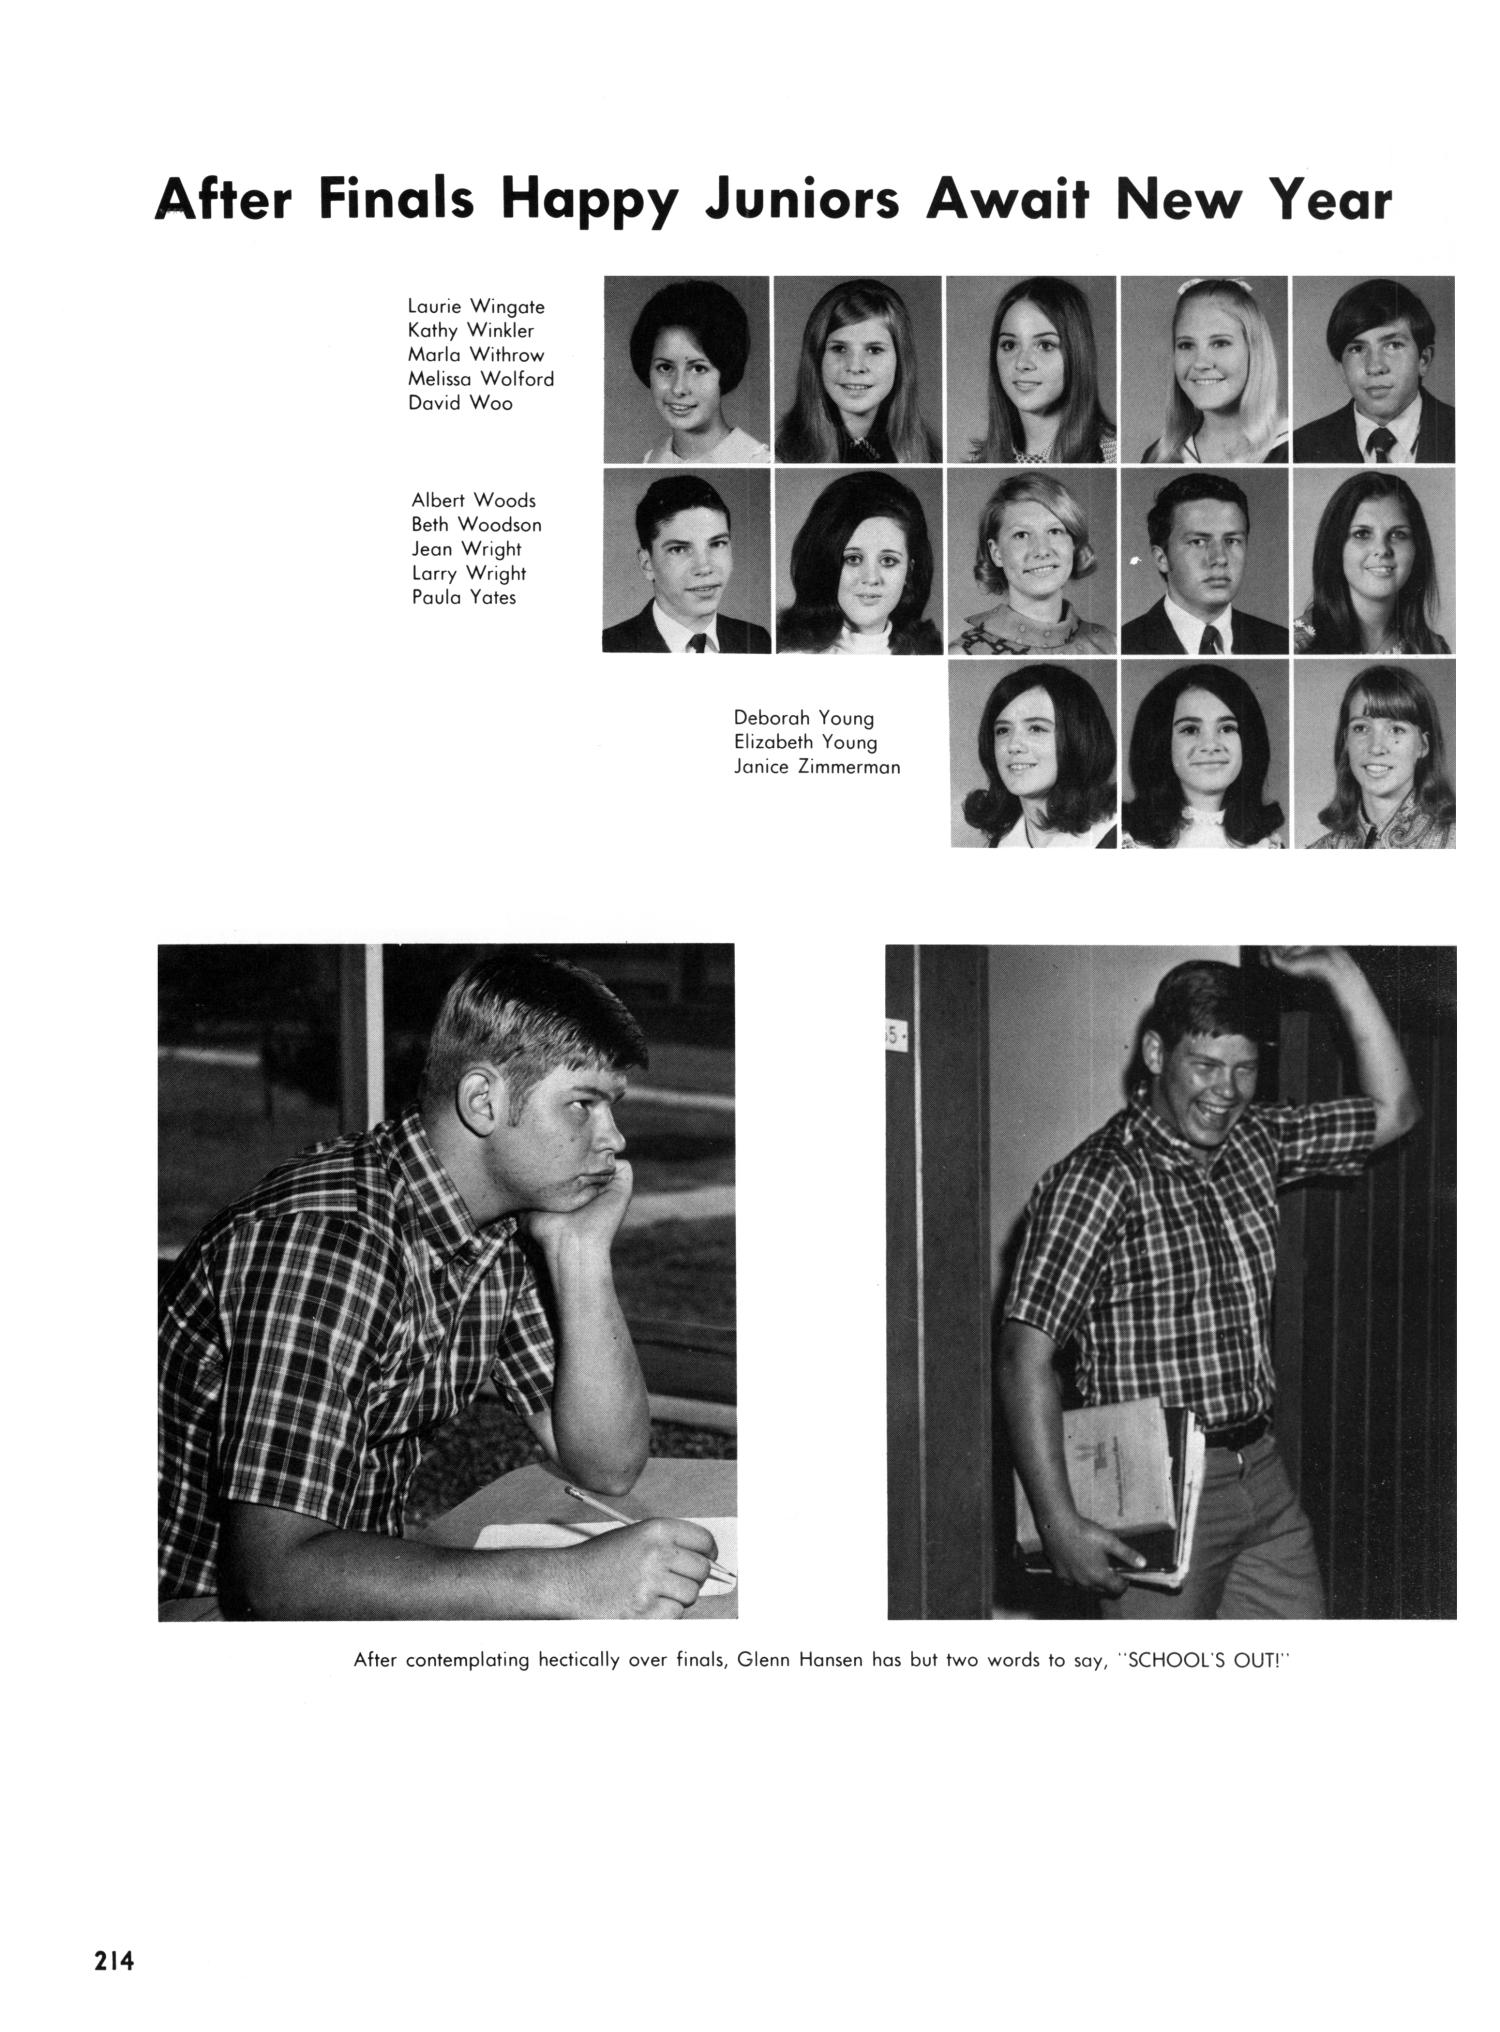 The Yellow Jacket, Yearbook of Thomas Jefferson High School, 1970
                                                
                                                    214
                                                